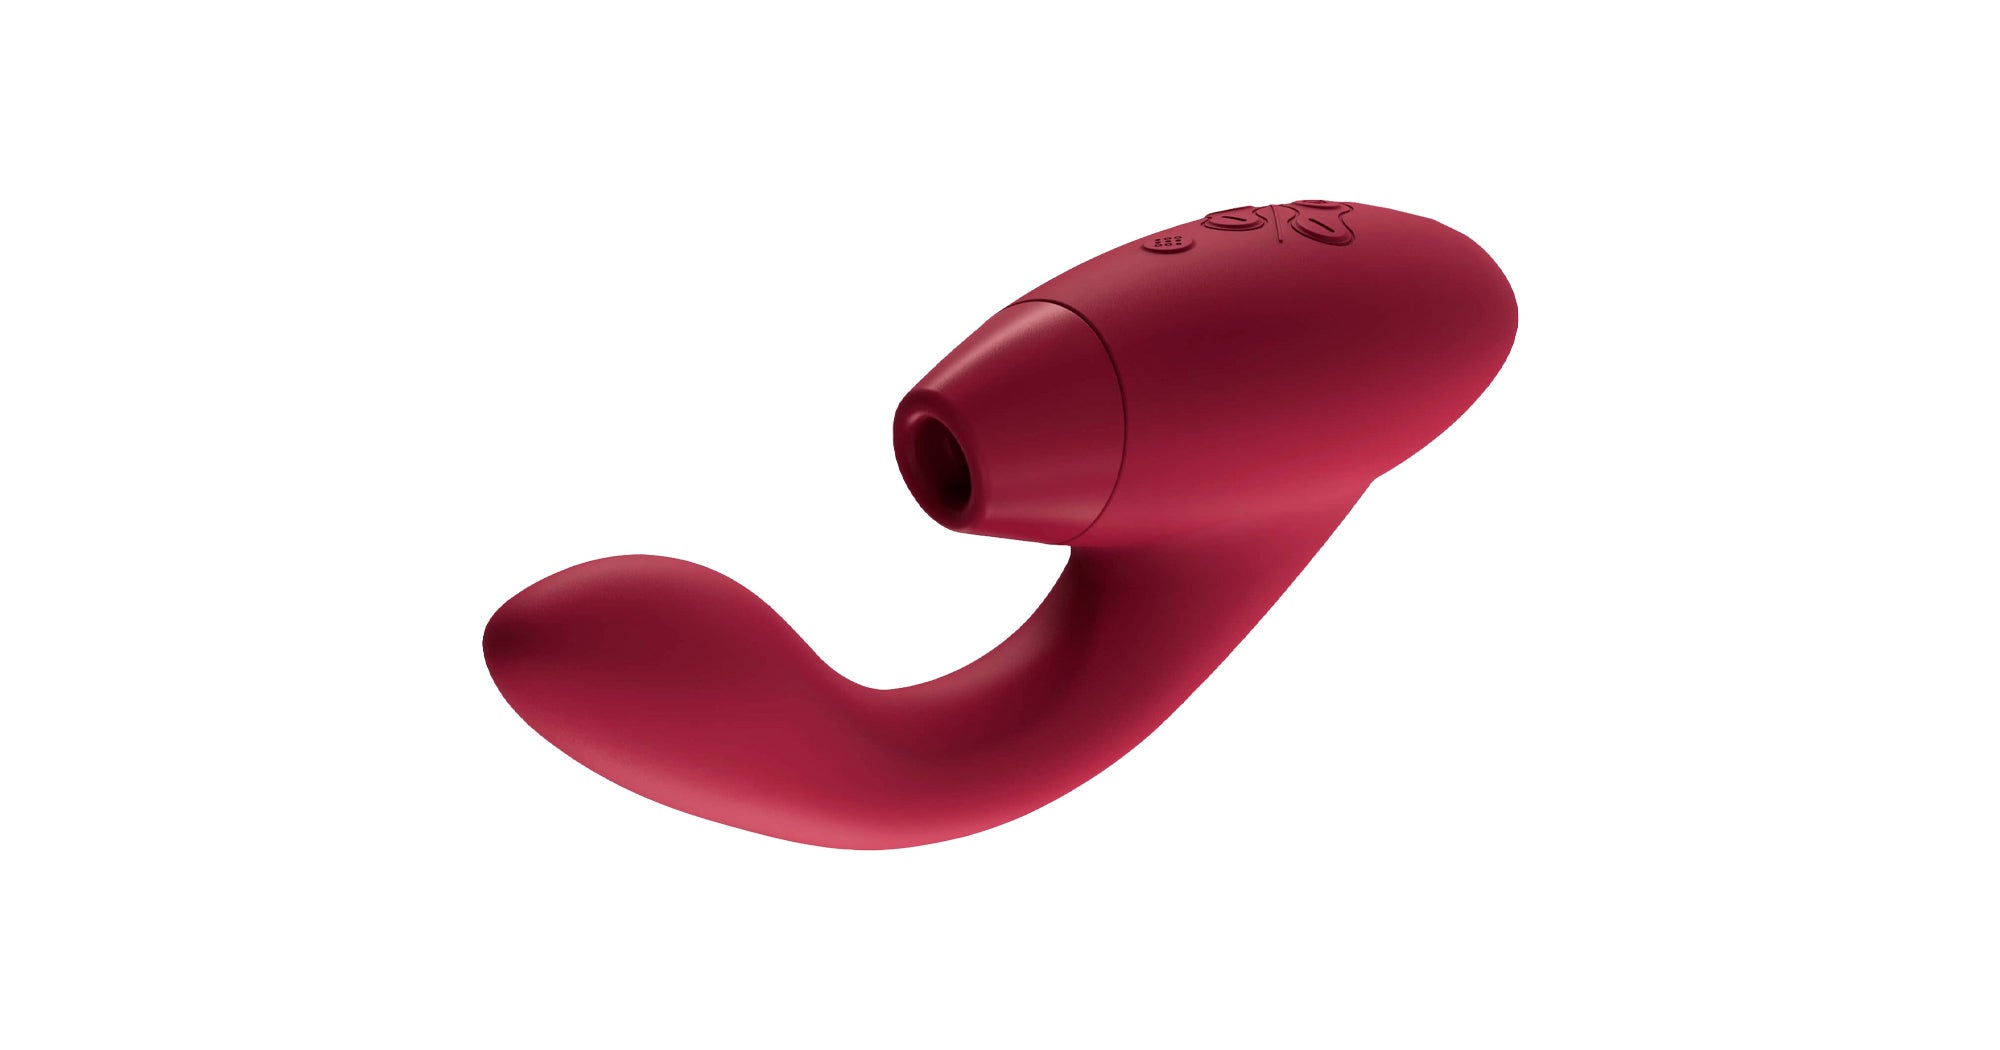 Best Sex Toys Gift Guide 2022 Vibrators, Naughty Gifts